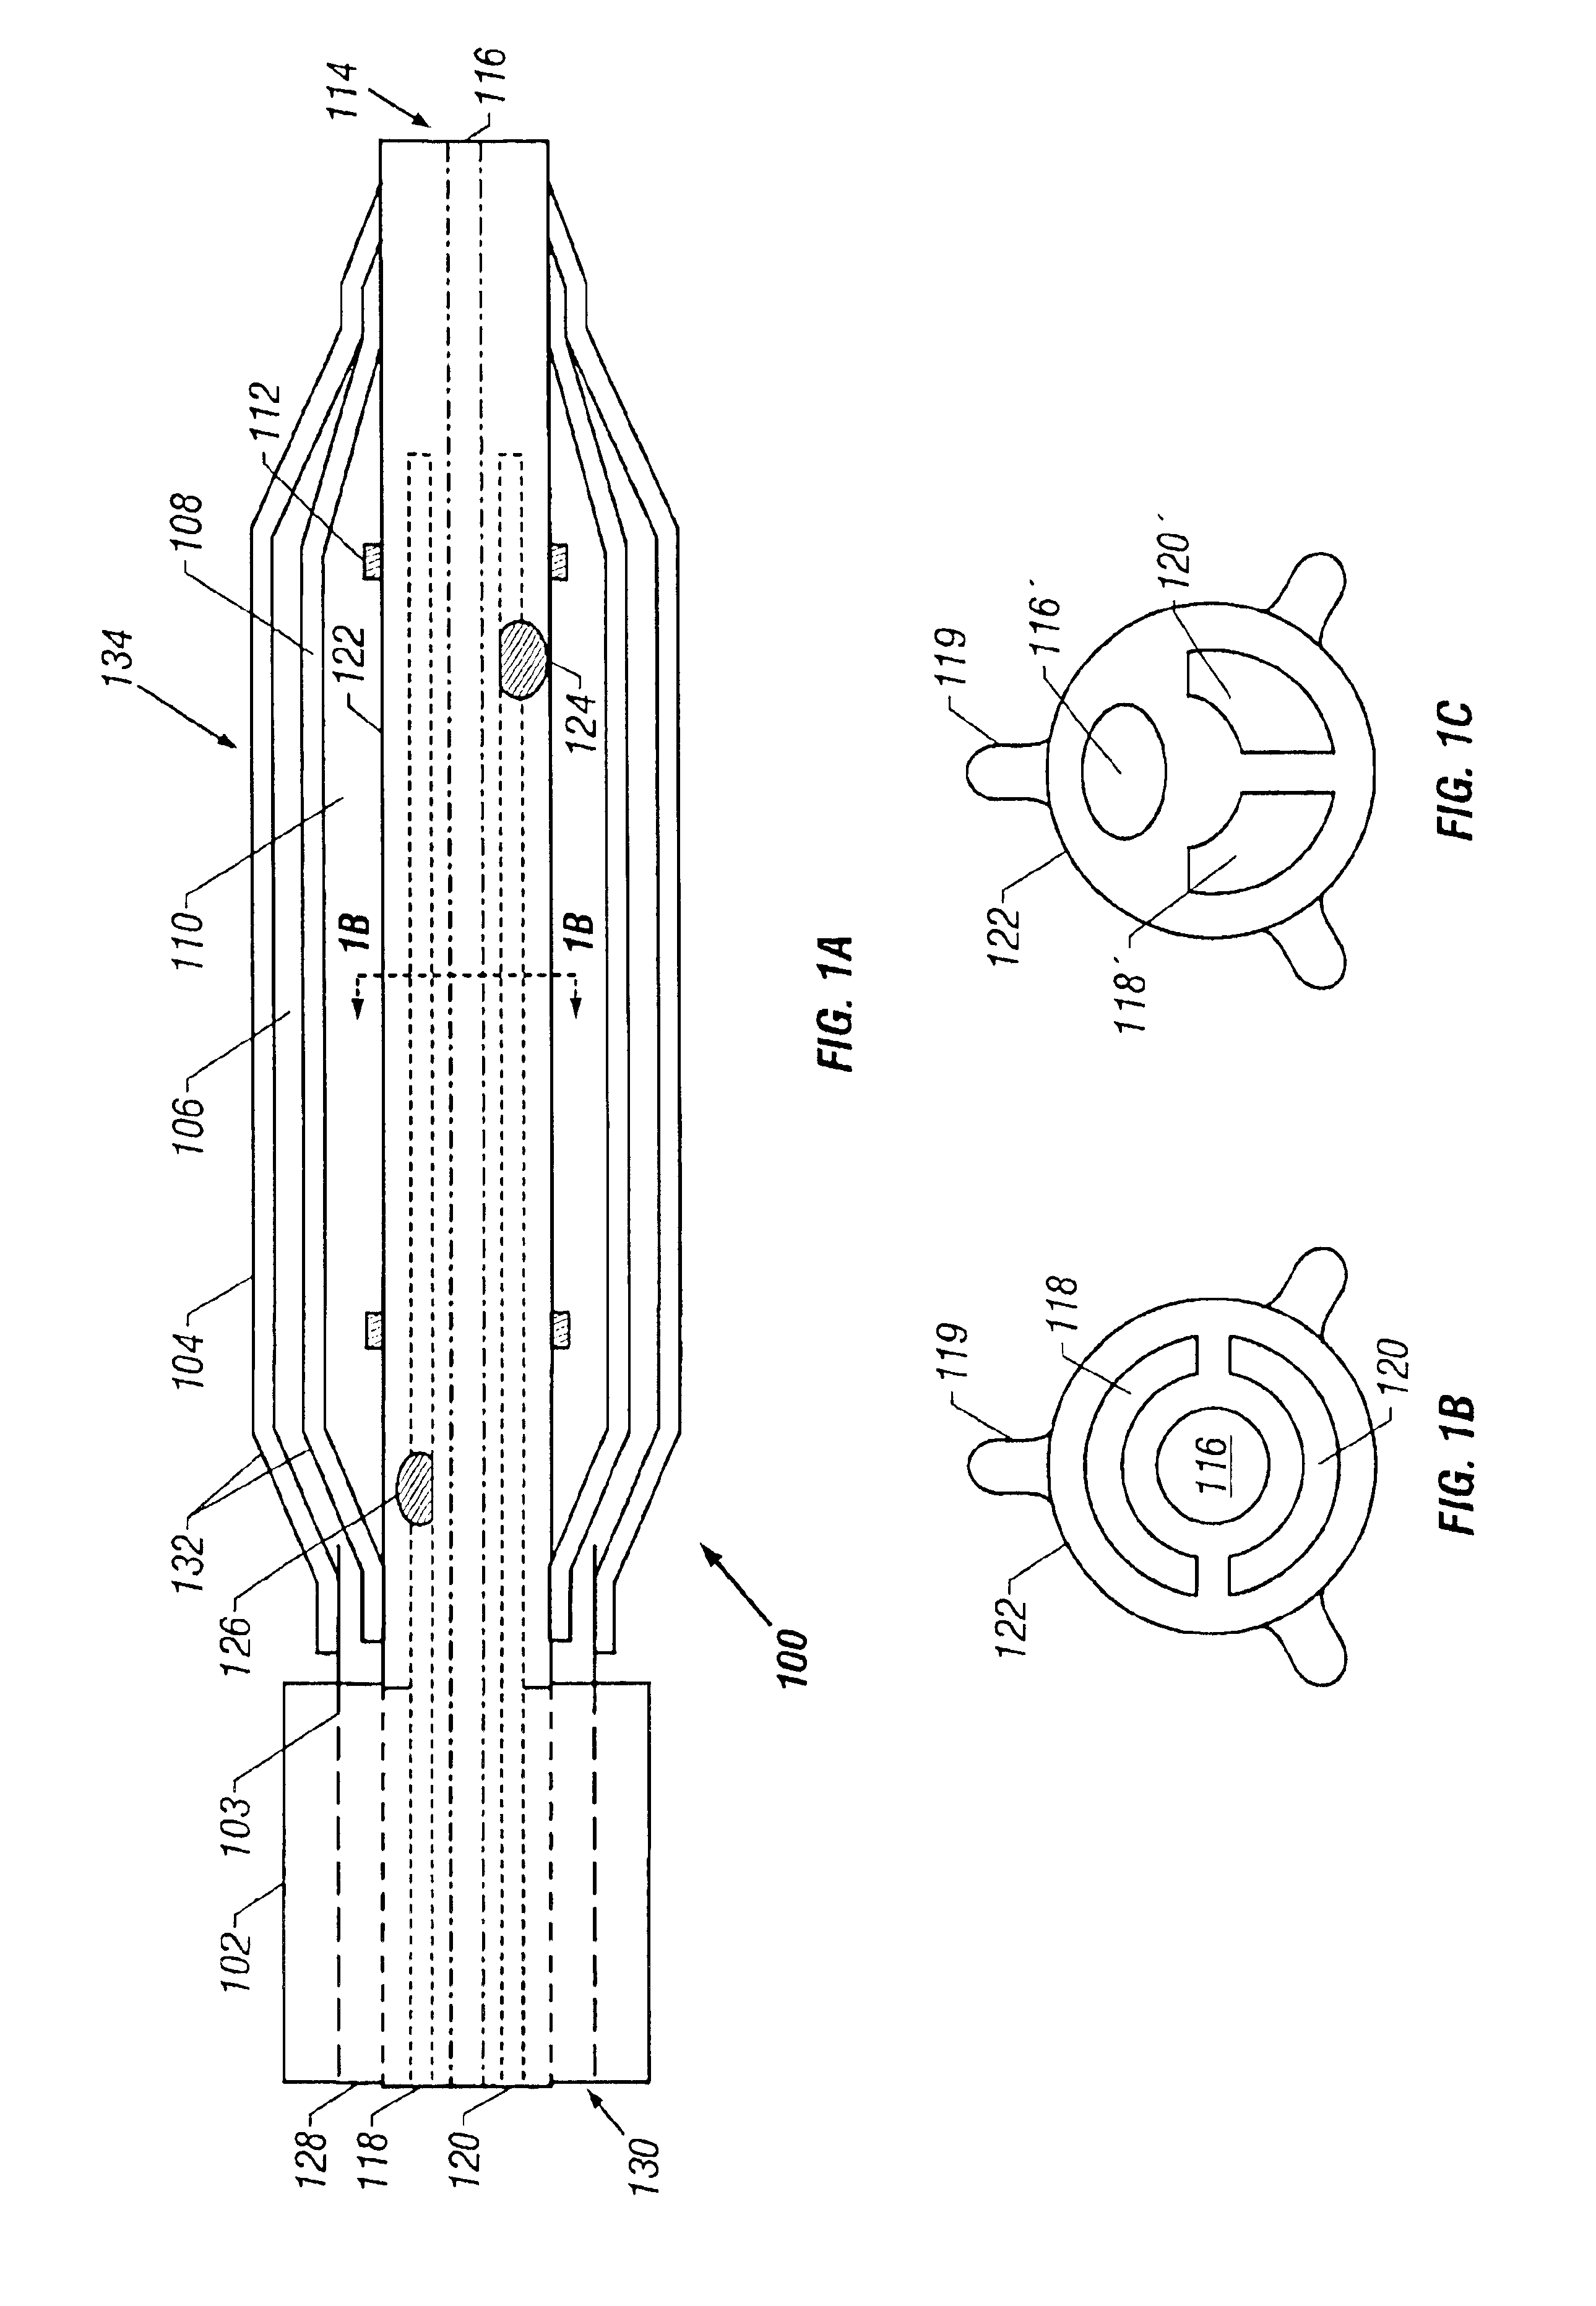 Method and device for performing cooling or cryo-therapies, for, e.g., angioplasty with reduced restenosis or pulmonary vein cell necrosis to inhibit atrial fibrillation employing tissue protection